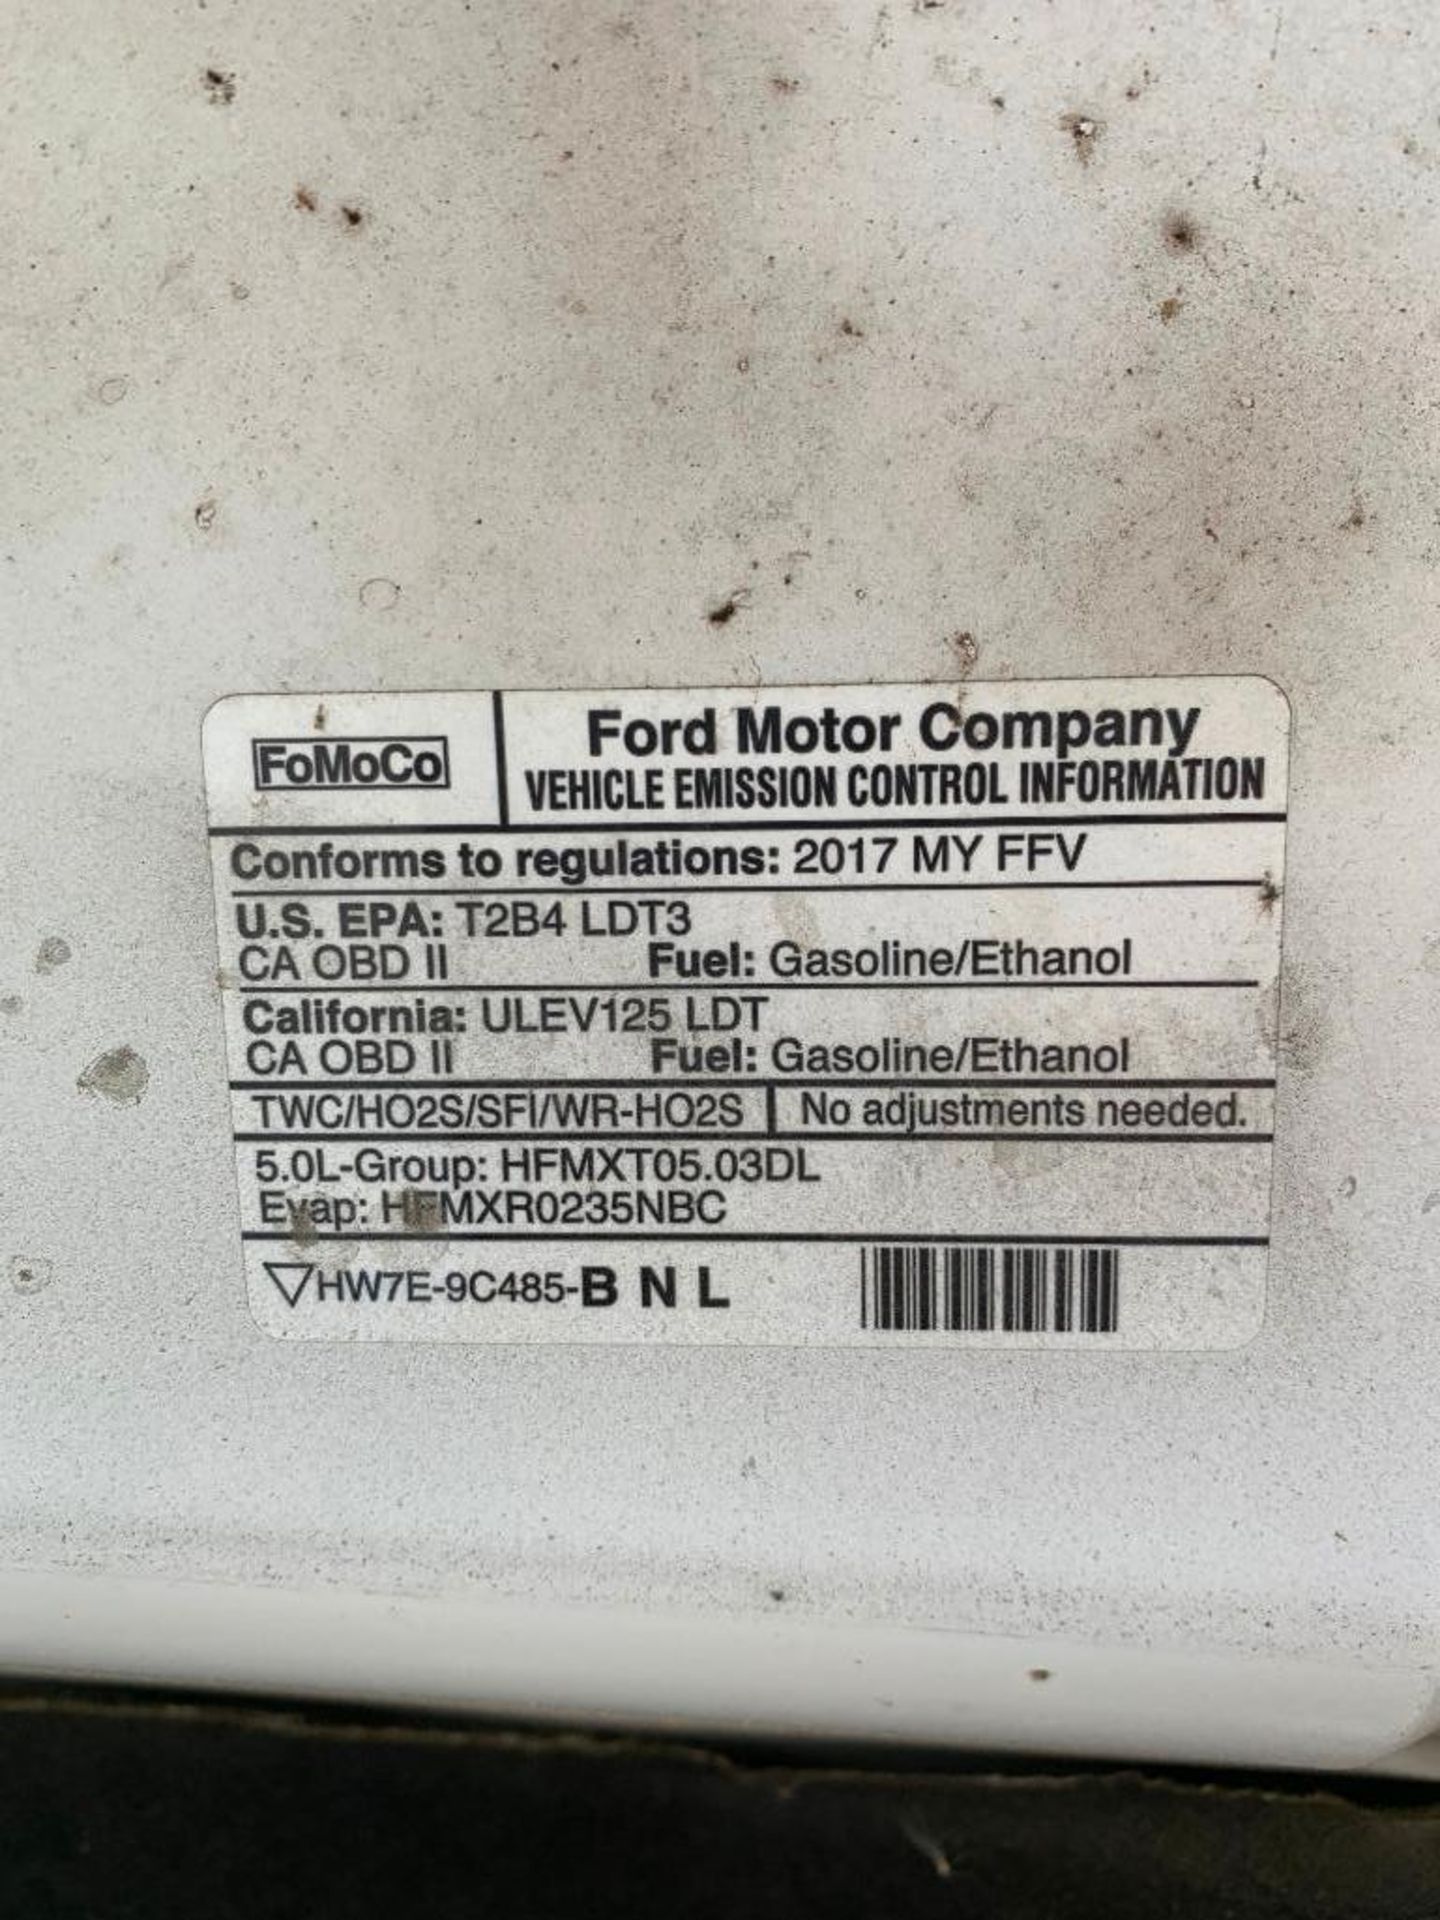 2017 Ford F150 Pick Up VIN#1FTEW1EF2HKD87996 42332 (indicated miles) - Image 6 of 6